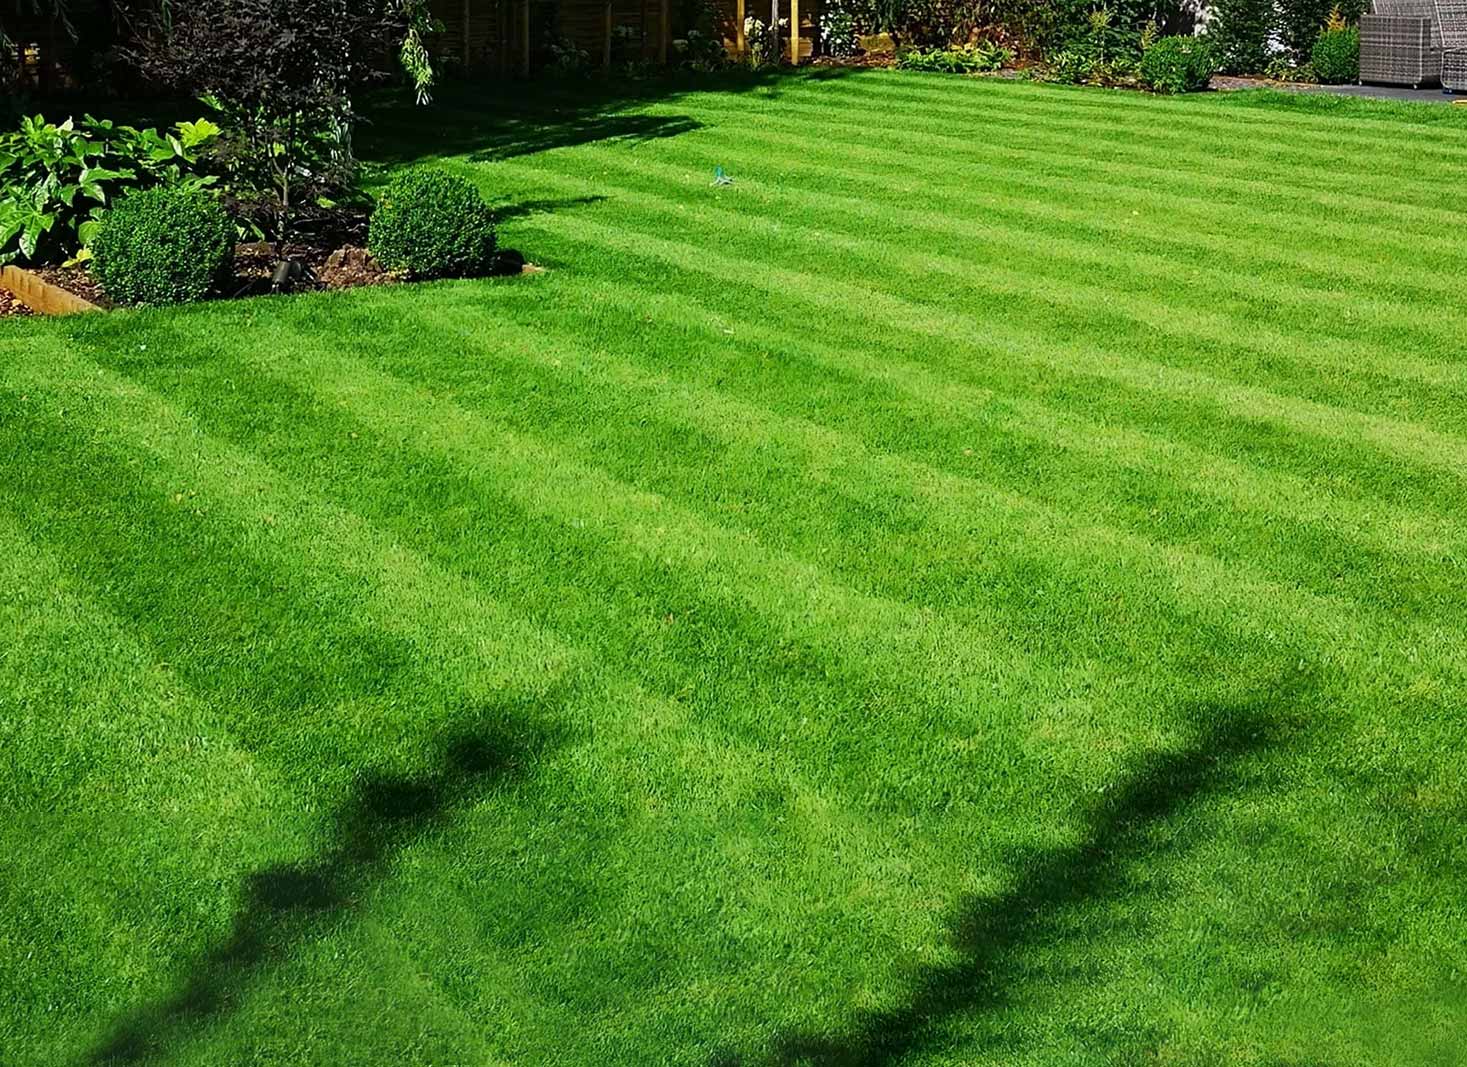 Monitoring Lawn Health After Aeration